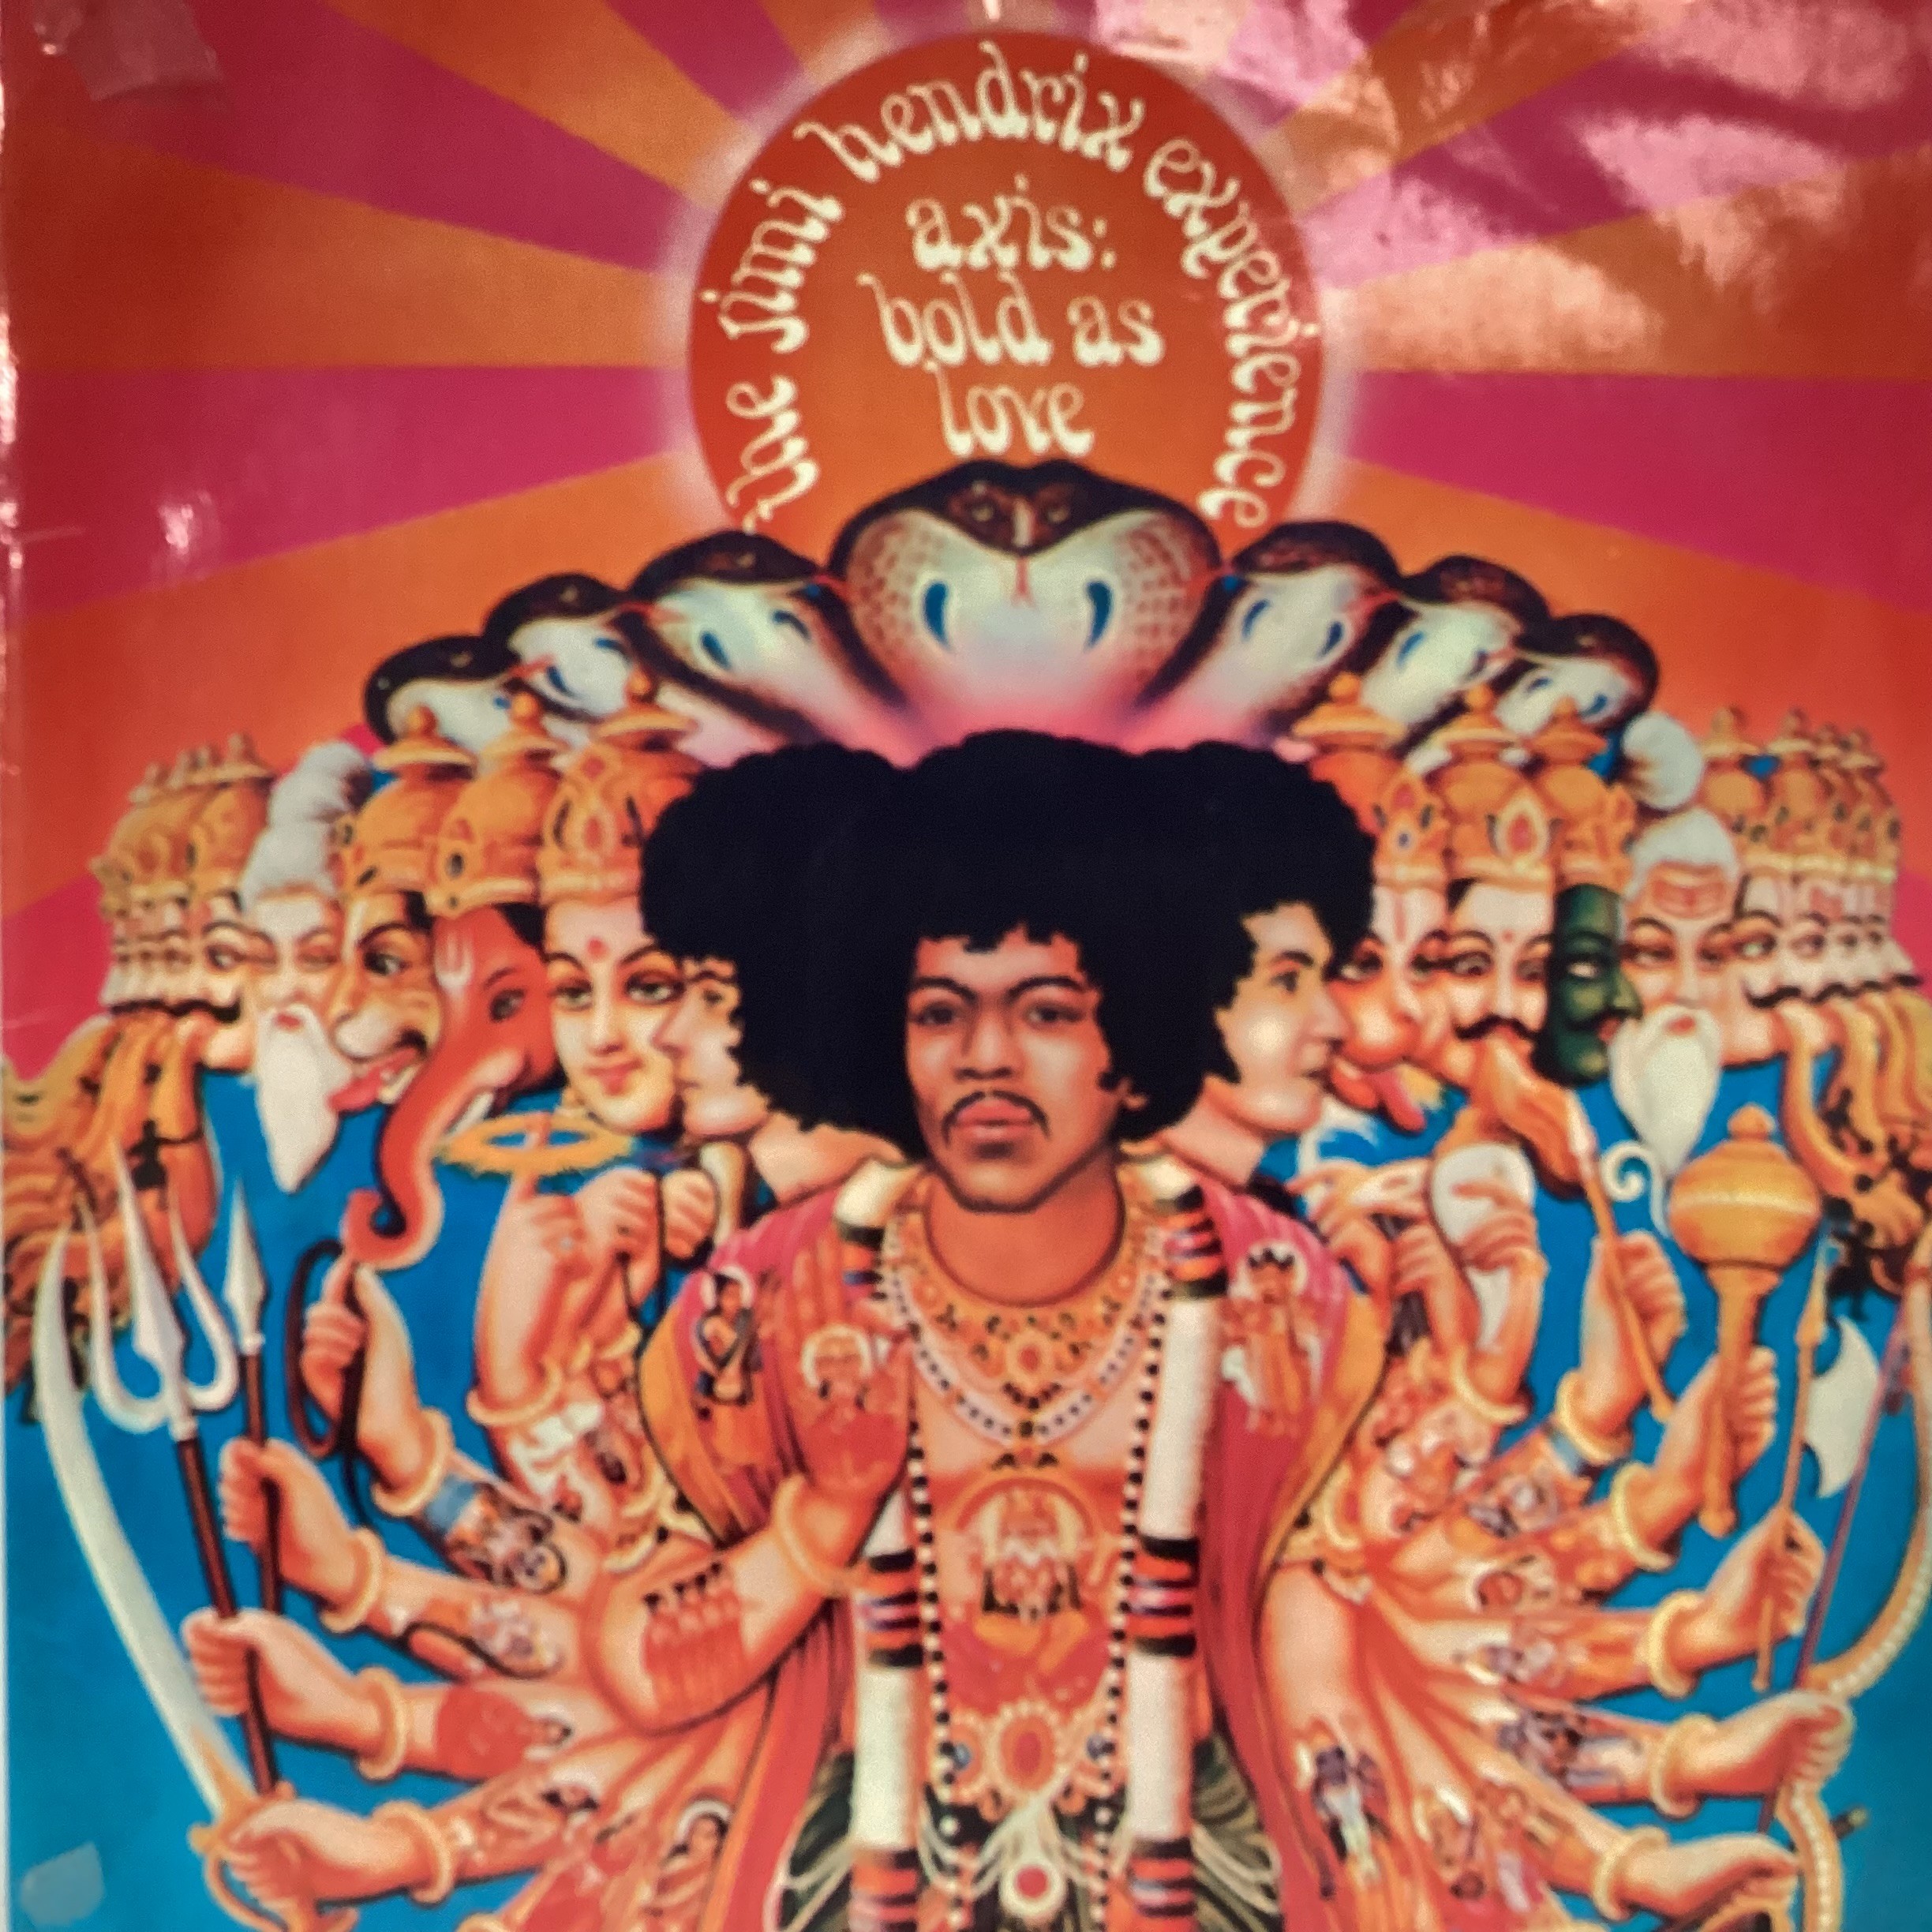 THE JIMI HENDRIX EXPERIENCE ‘AXIS BOLD AS LOVE’ VINYL ALBUM. This original Track label 612003 was